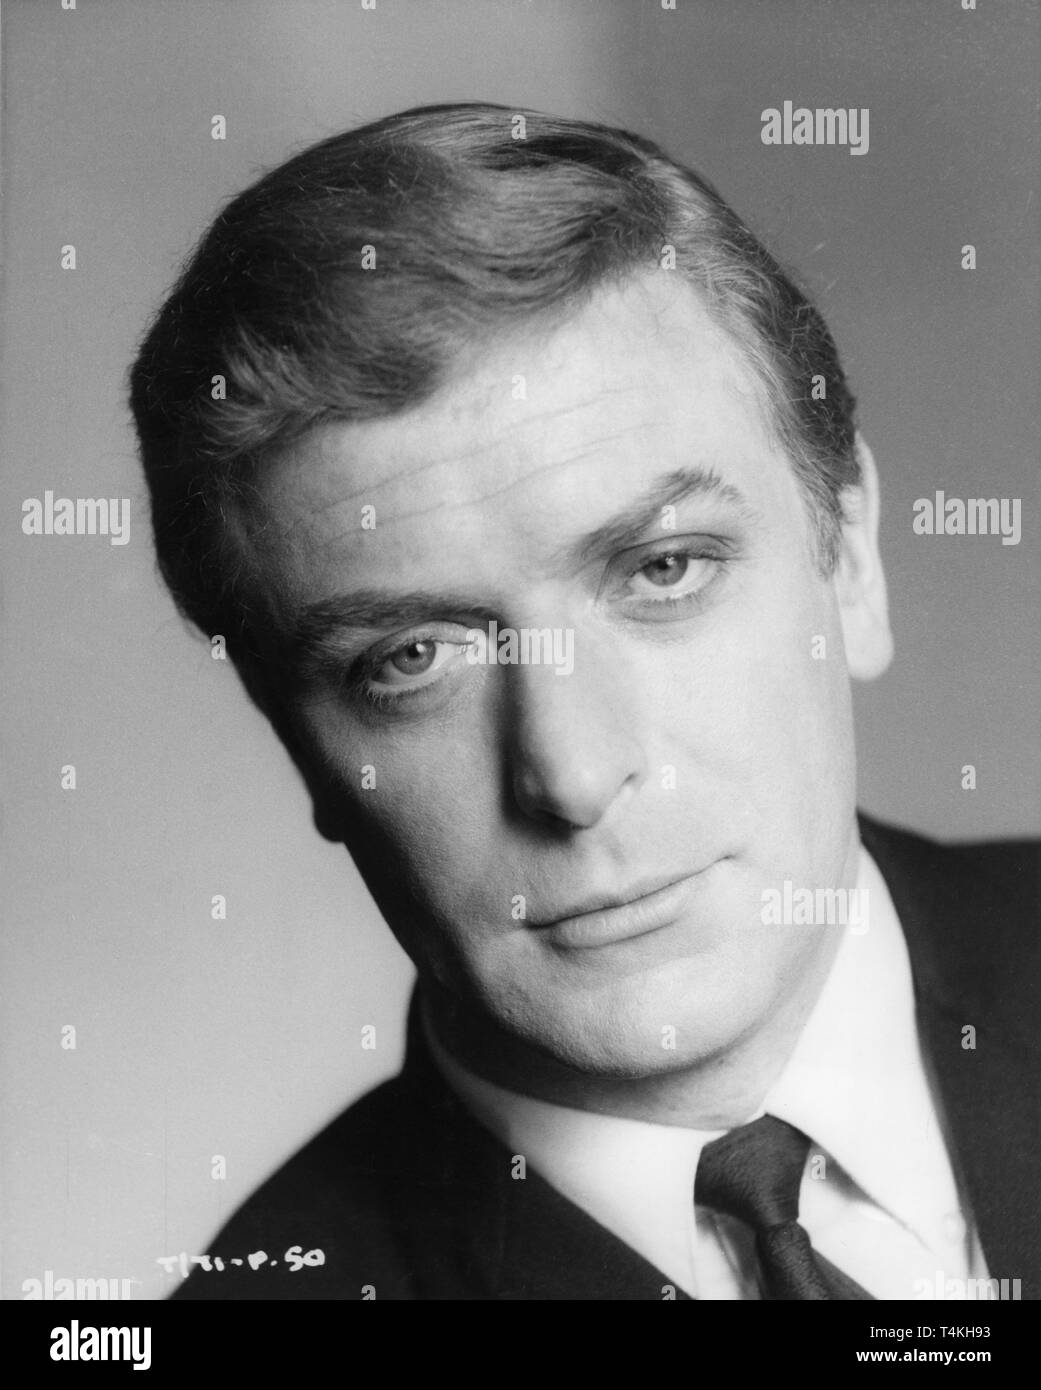 MICHAEL CAINE as Harry Palmer classic early portrait publicity for THE IPCRESS FILE director Sidney J. Furie novel Len Deighton Steven S.A. / Lowndes Productions Ltd / The Rank Organisation Stock Photo